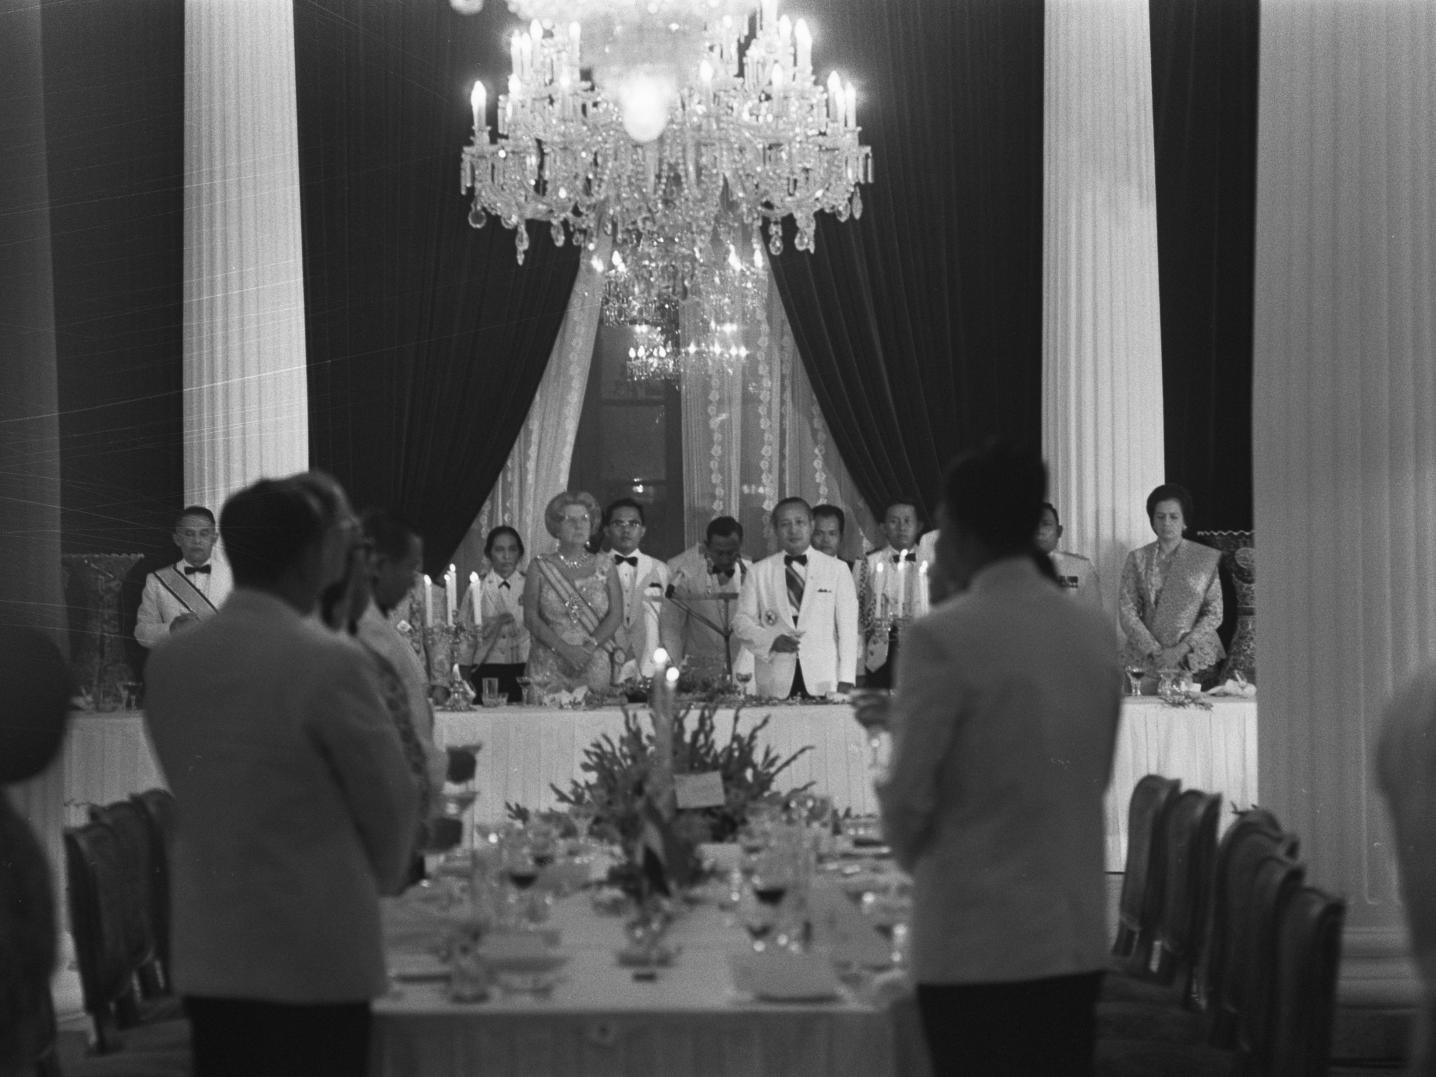 Queen Juliana and President Suharto at the state banquet held in Istana Negara in 1971 as part of the state visit of Queen Juliana and Prince Bernhard to Indonesia